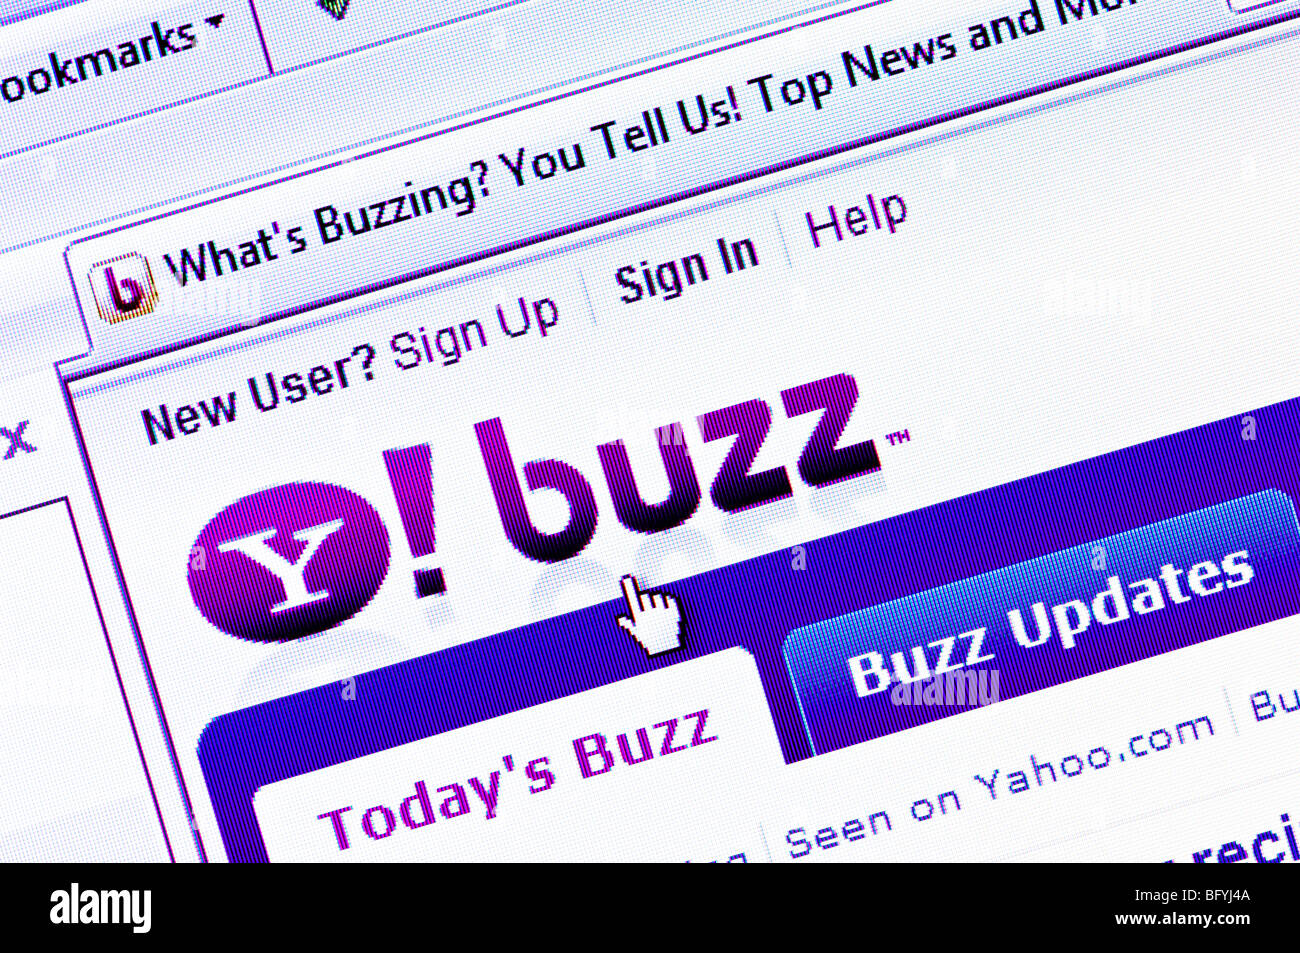 Macro screenshot of Yahoo! Buzz - the internet giant's news recommendation service. Editorial use only. Stock Photo